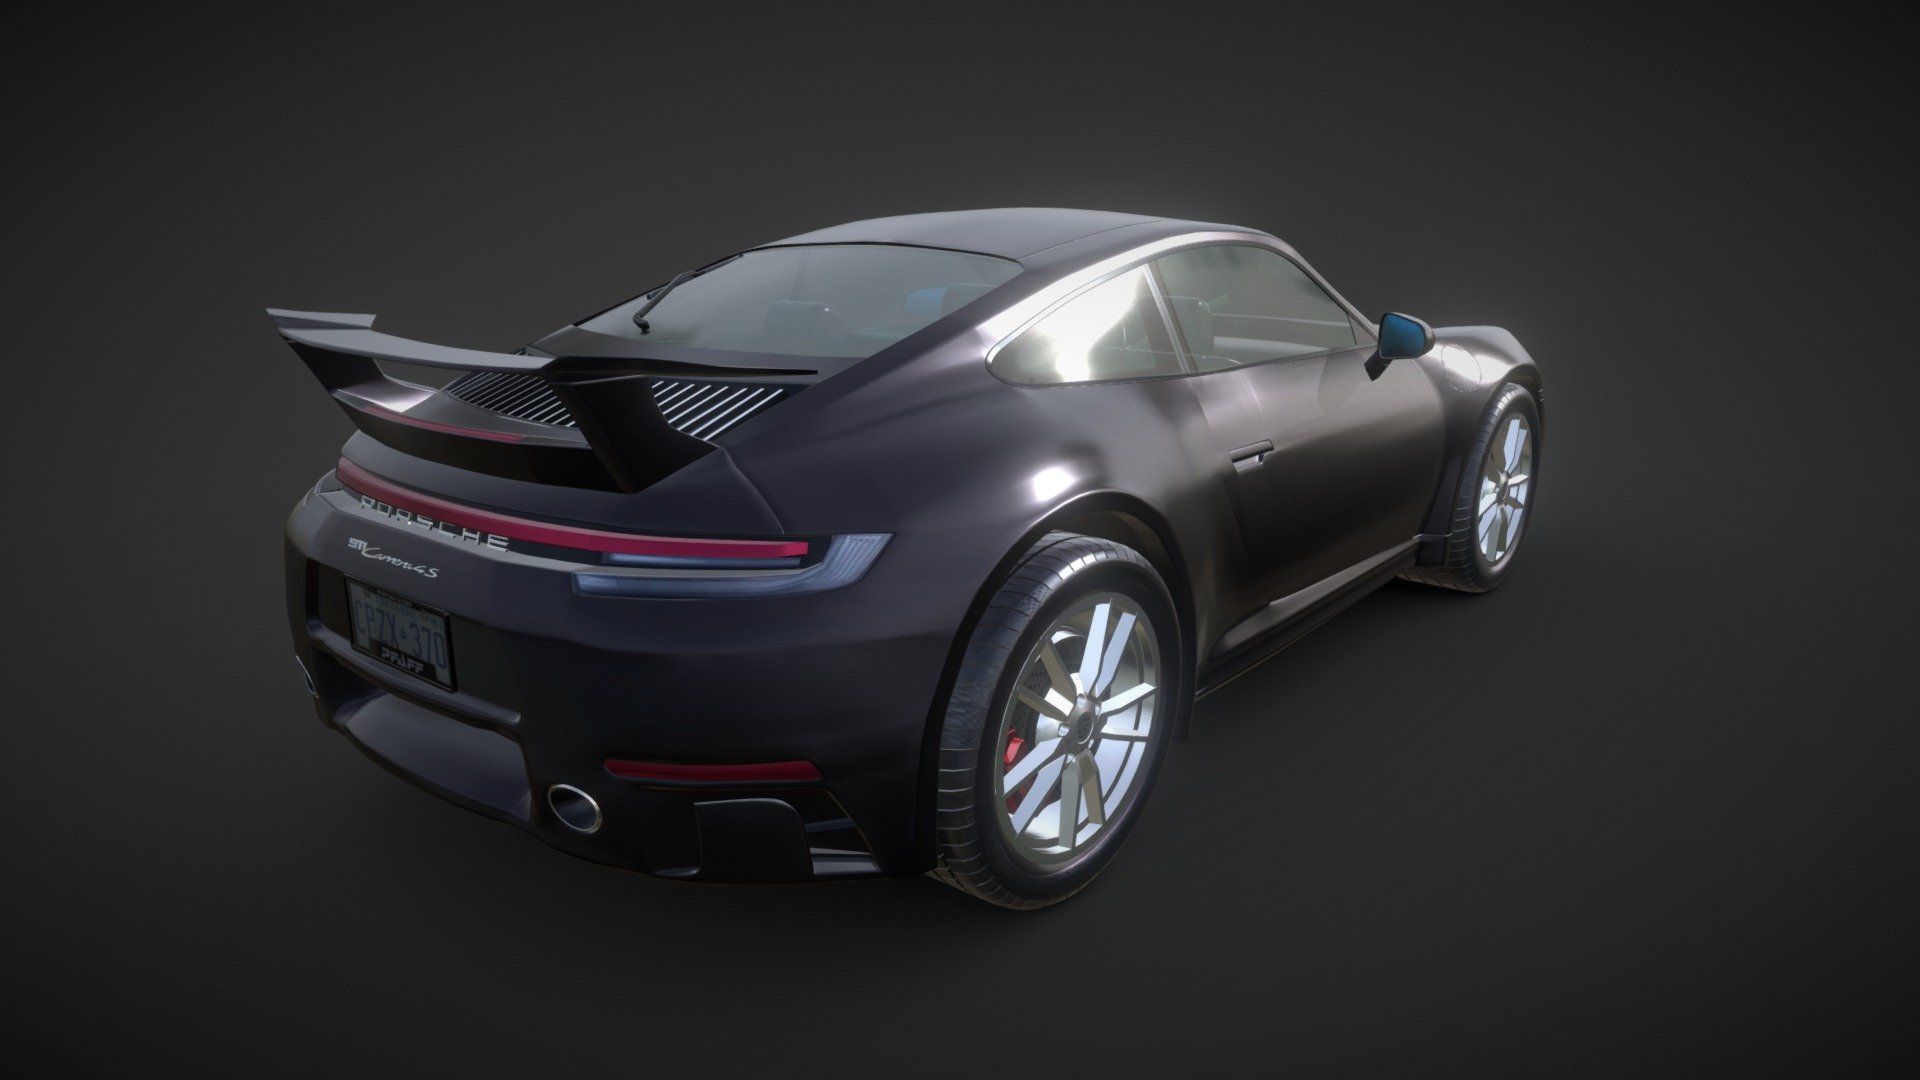 Porsche 911 C4S 2020 Aerokit

Please Like and share my work⭐️ It's free.
Thank you 3d model